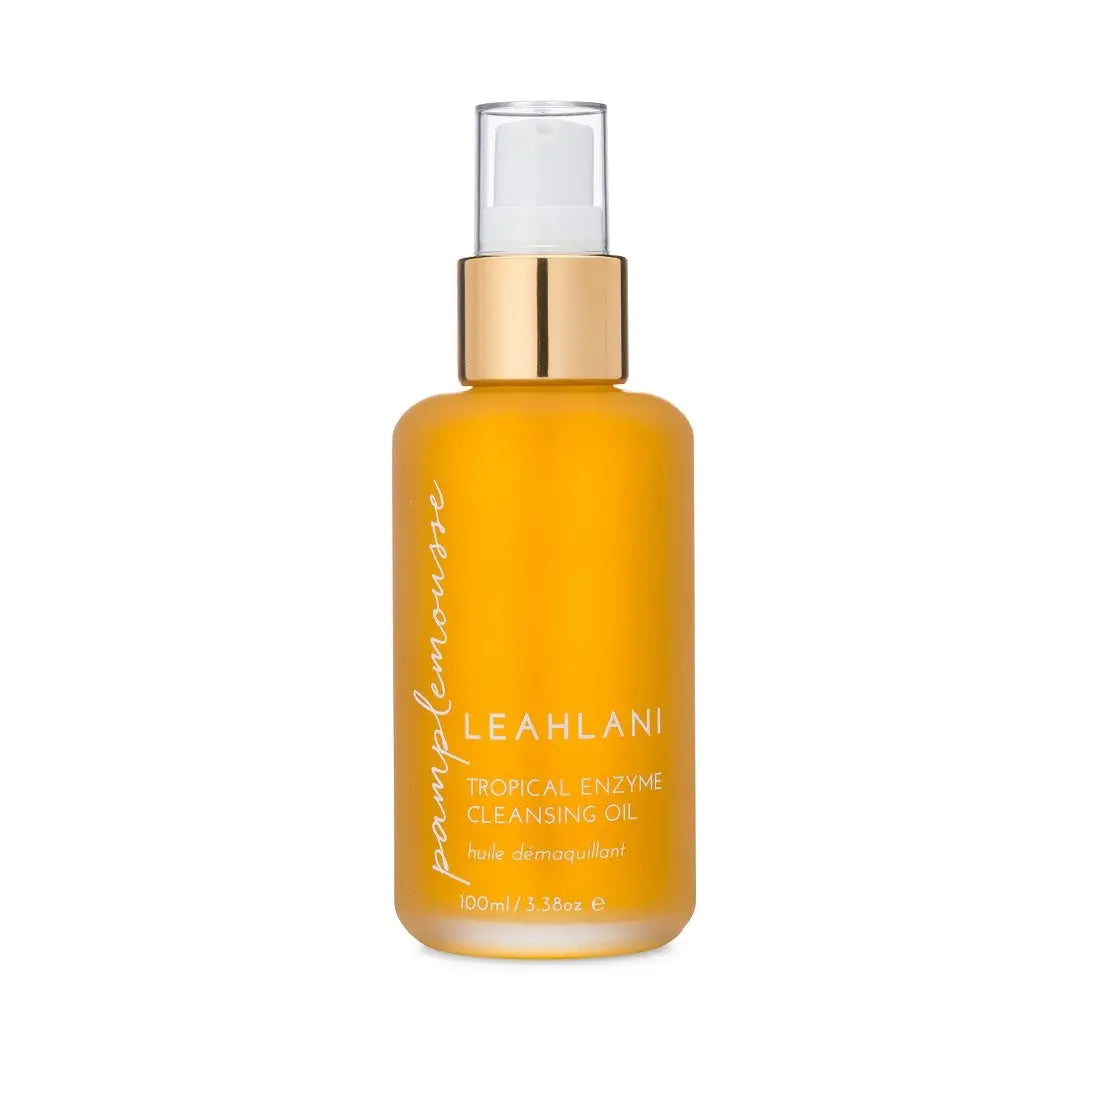 Leahlani Skincare Pamplemousse Tropical Enzyme Cleansing Oil 100ml